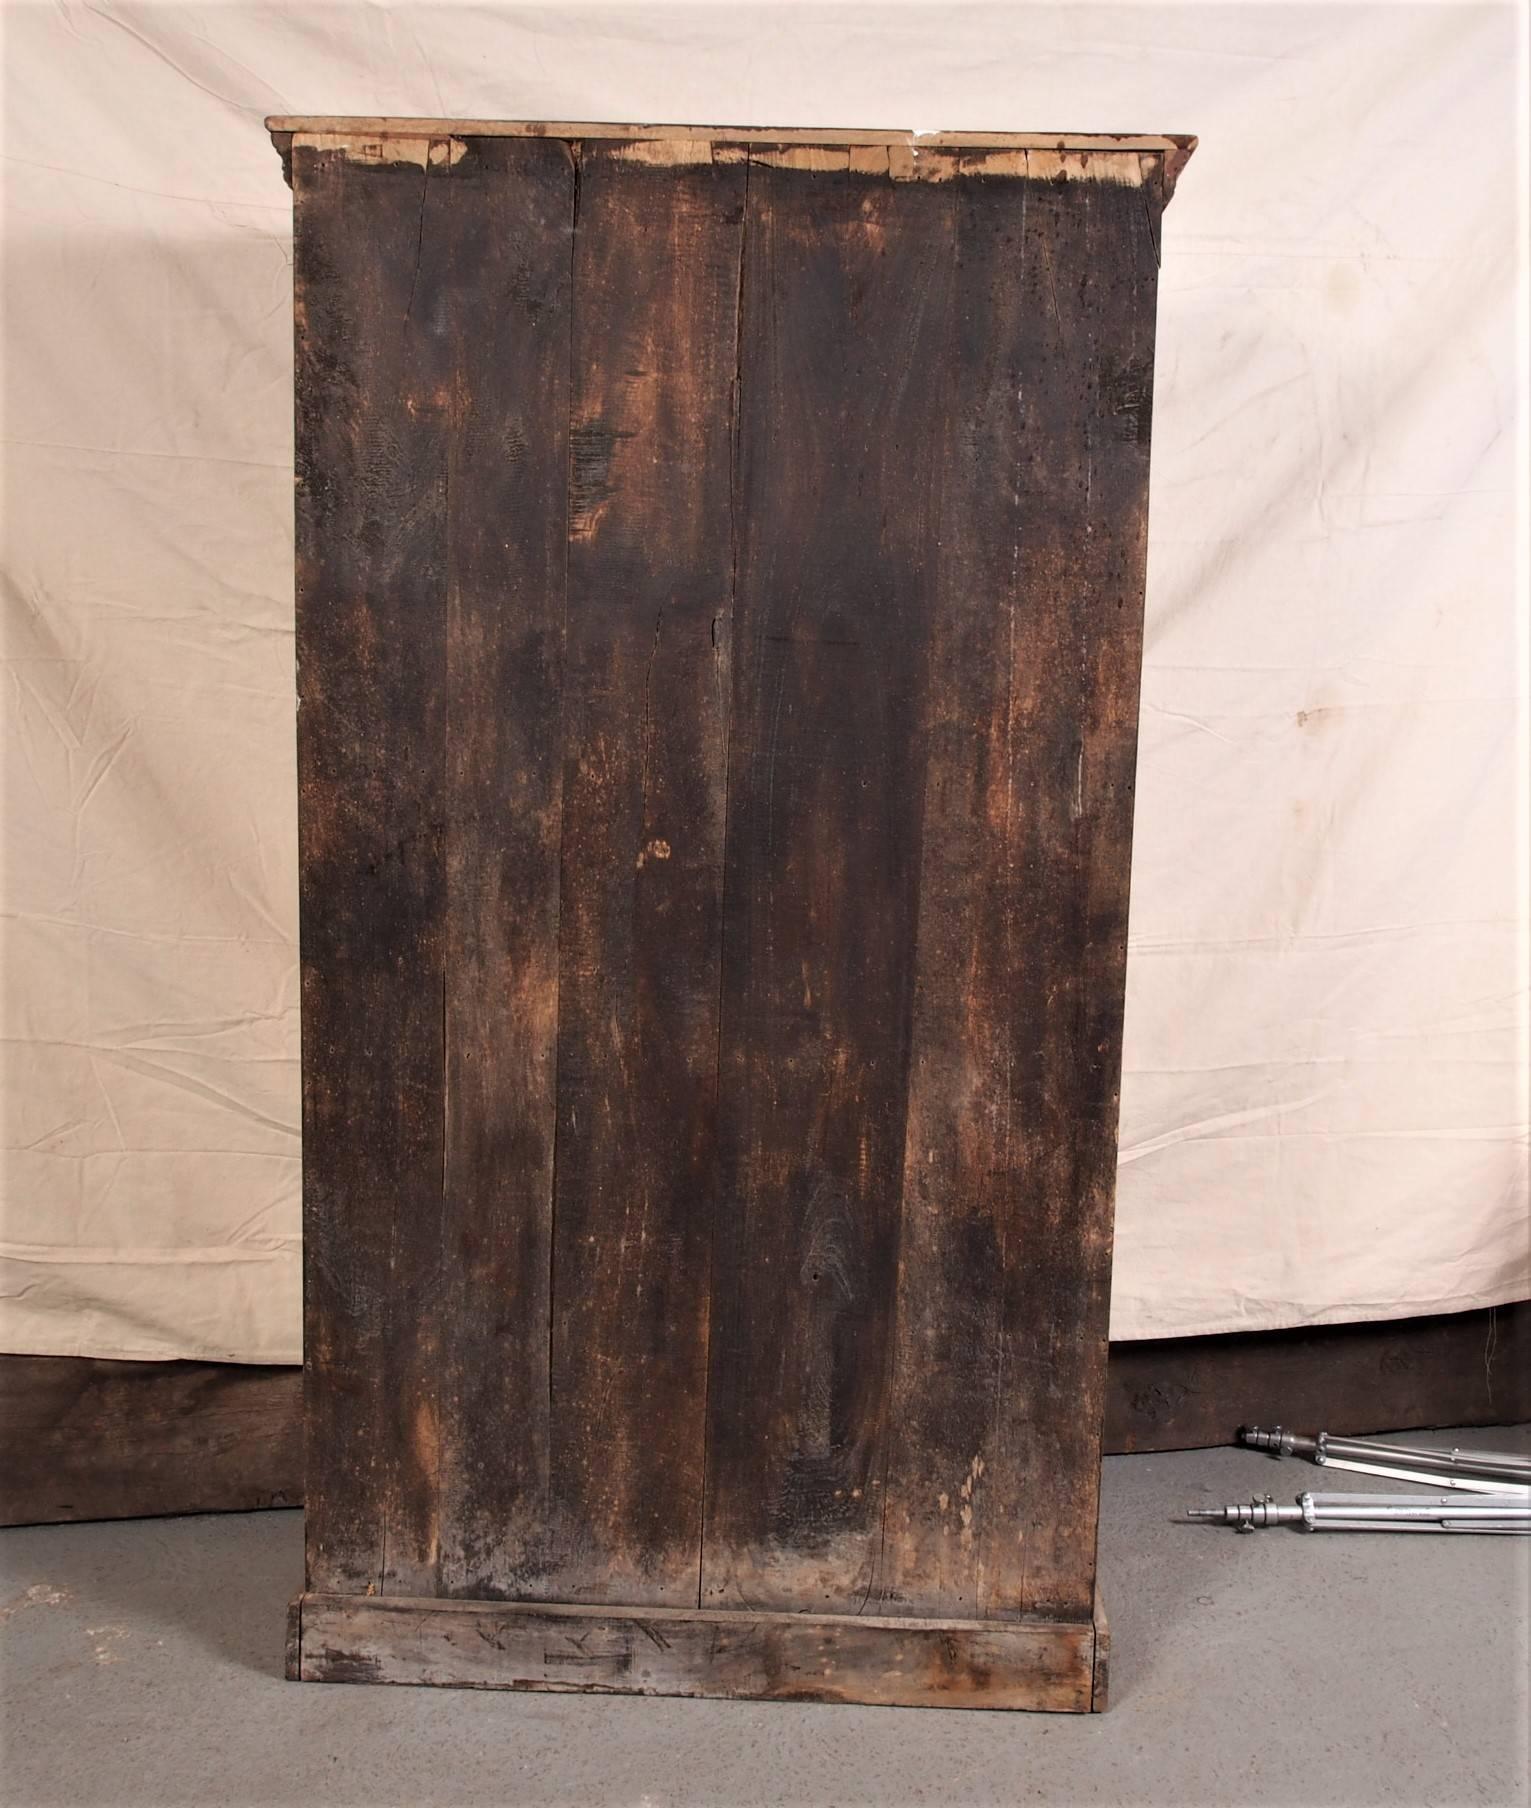 Antique four shelf bookcase cabinet with carved floral panel, planked construction, crown molding and raised on a plinth base.
Condition: distressed, consistent with age and use.